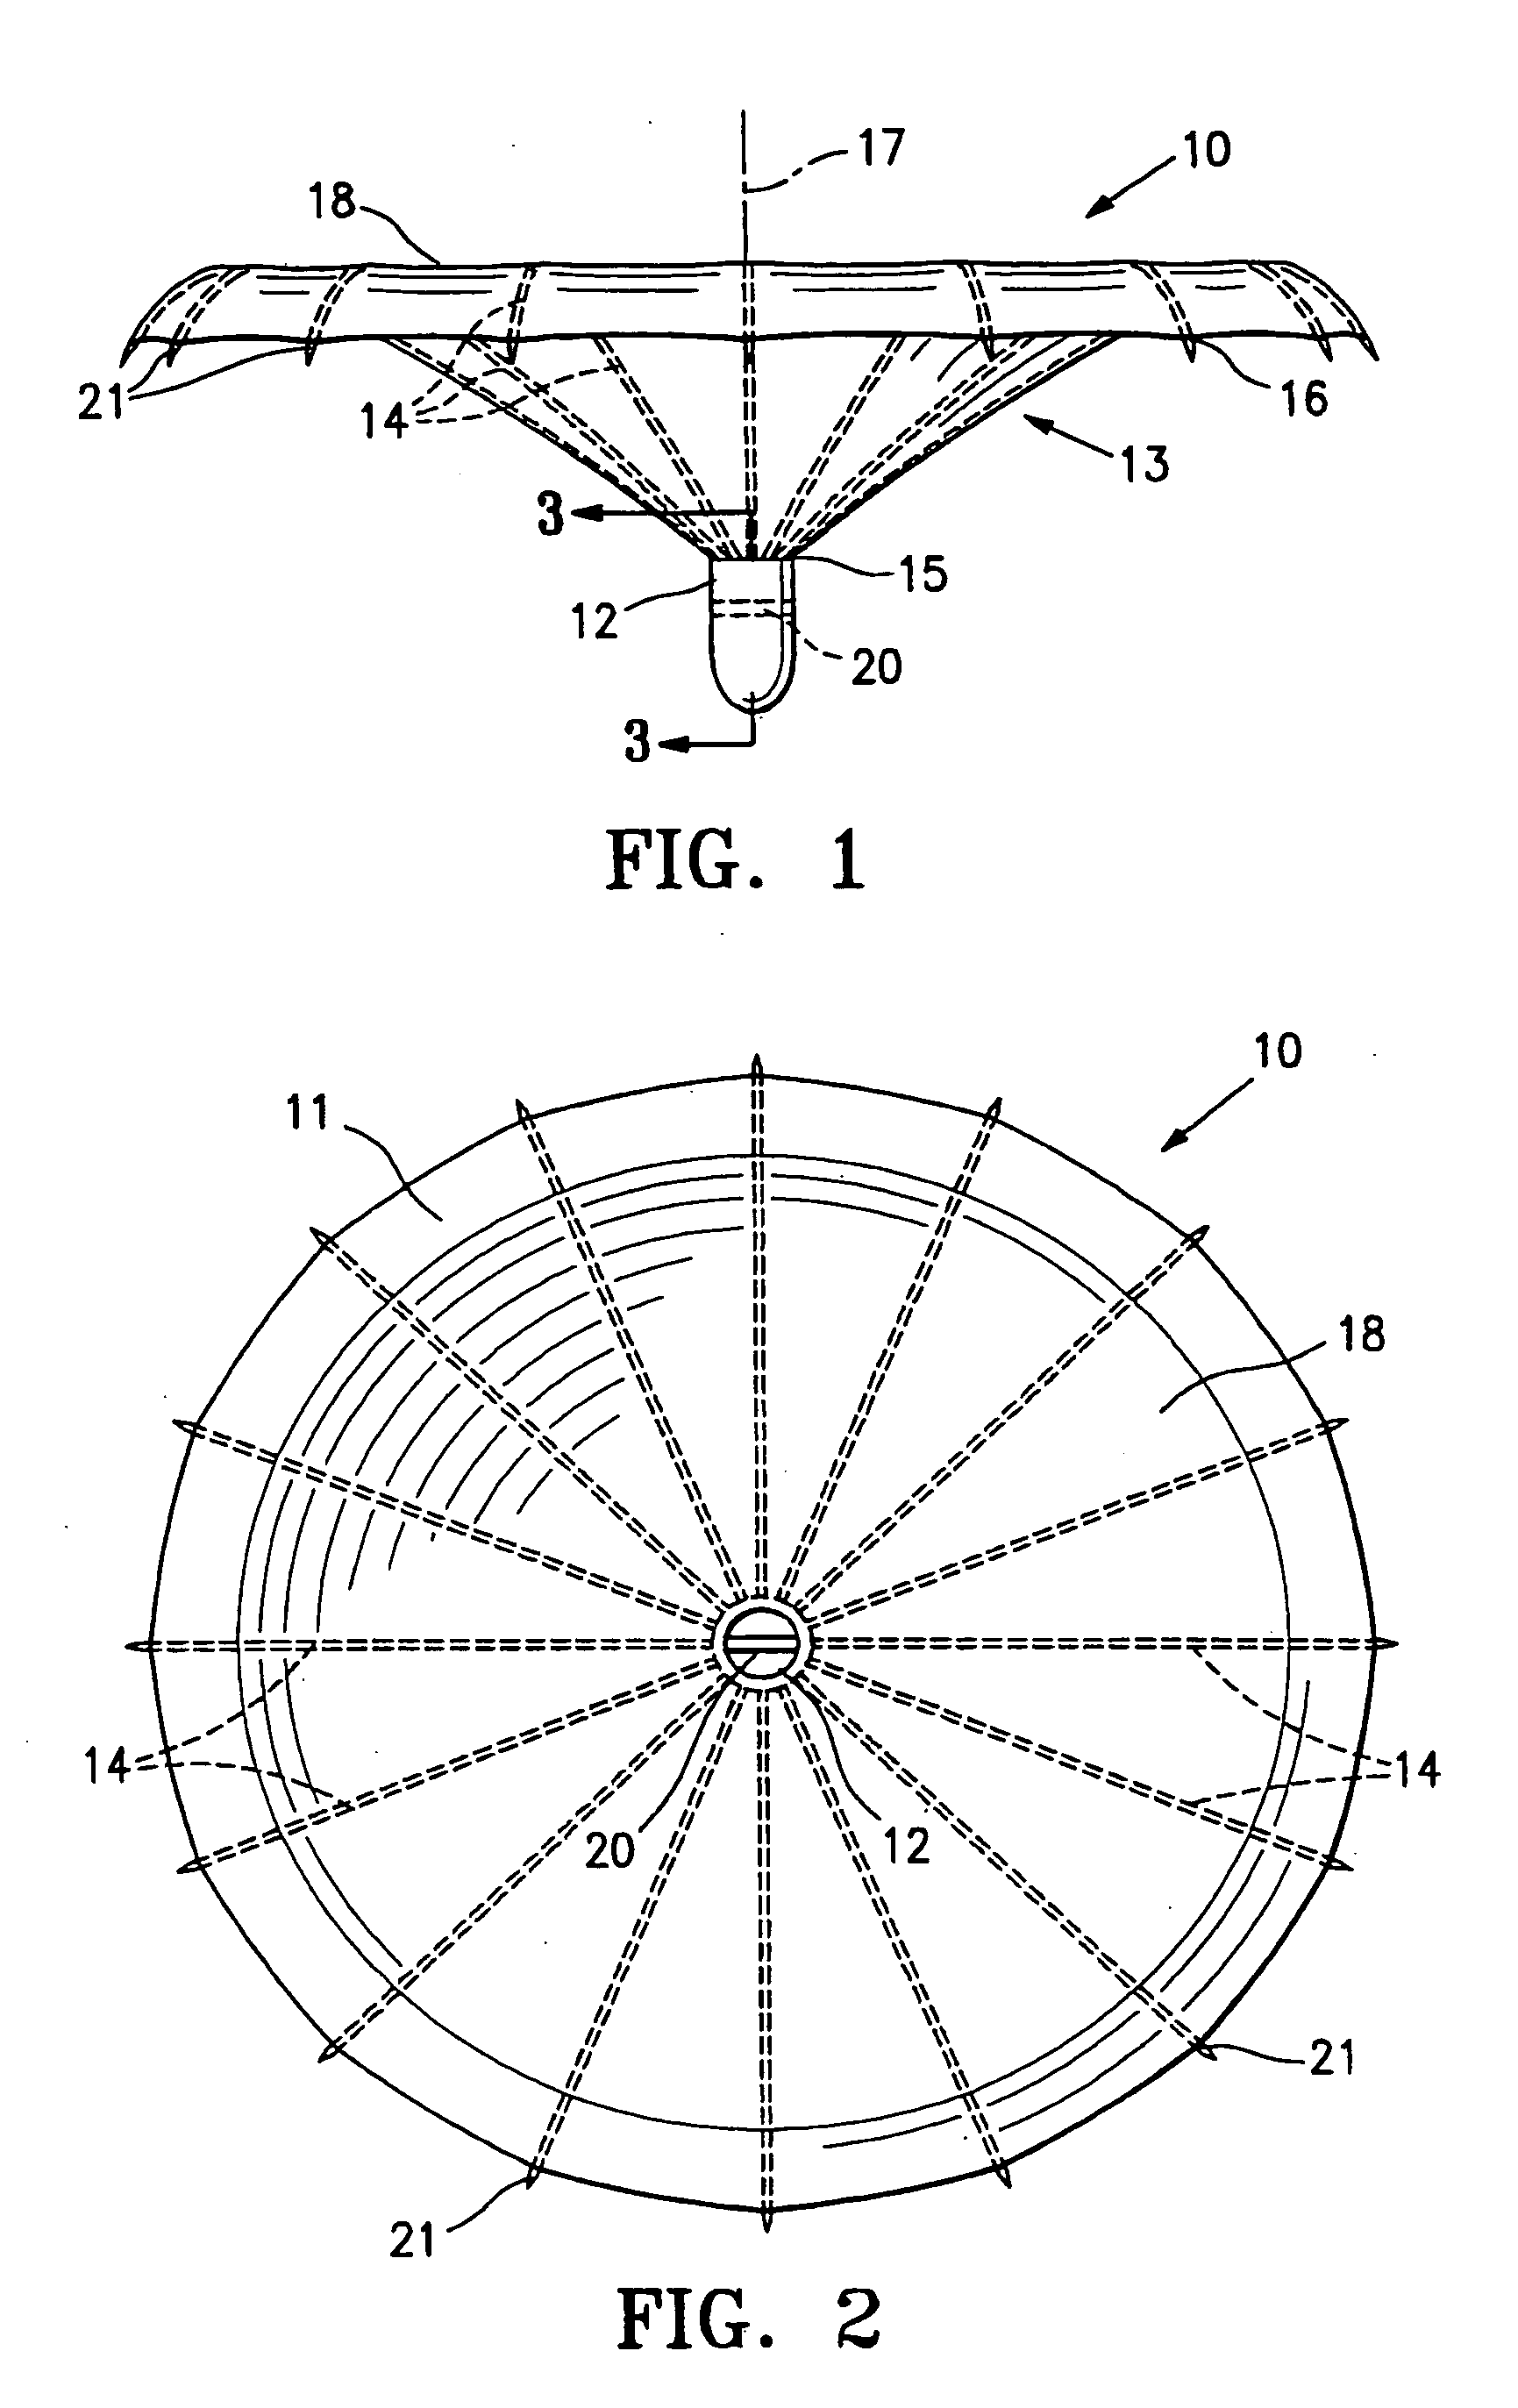 Ventricular partitioning device